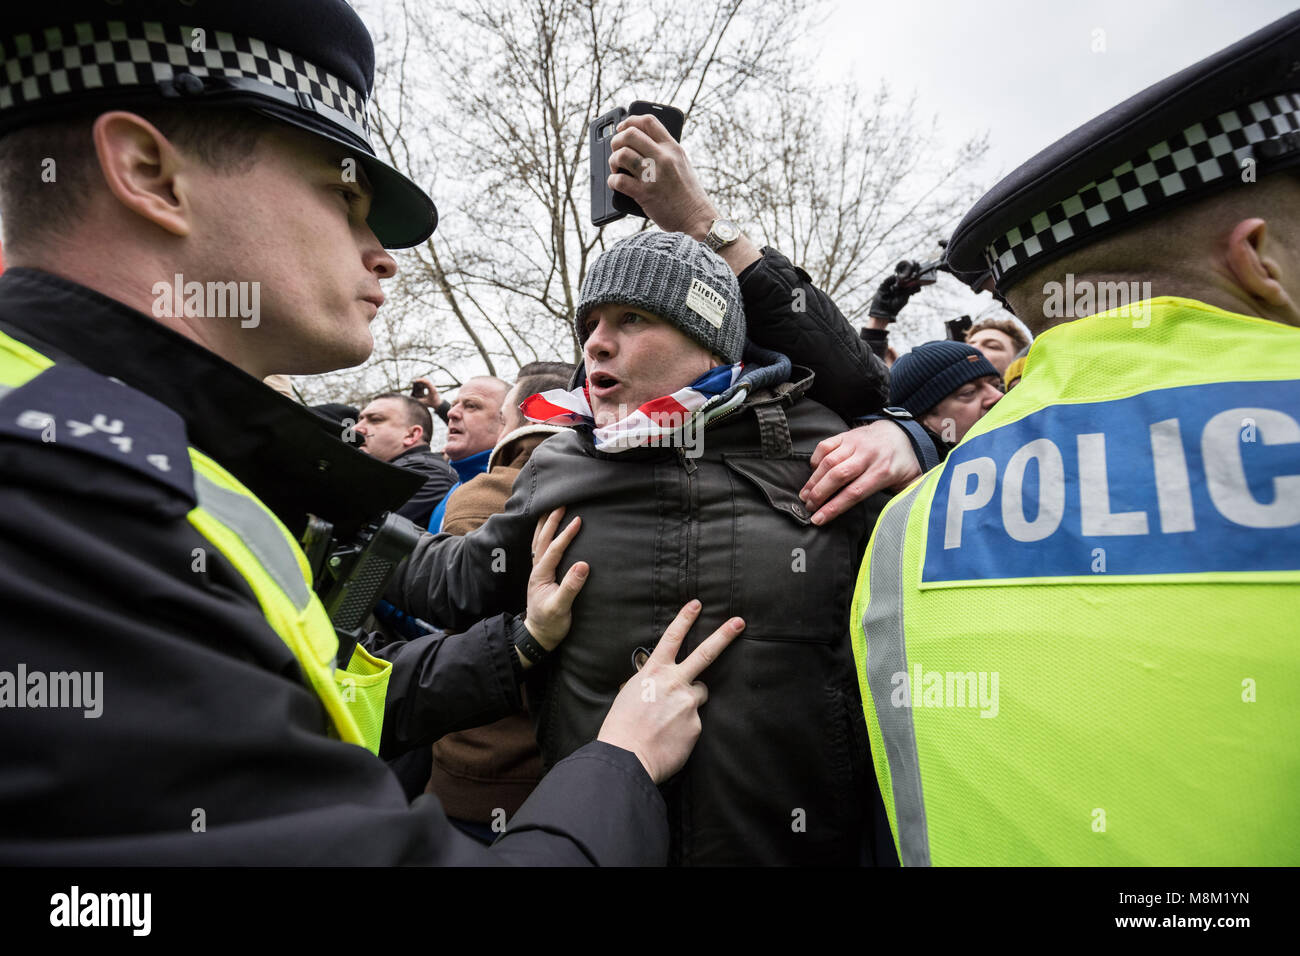 London, UK. 18th March, 2018. Hundreds gather at Speakers’ Corner, Hyde Park waiting to hear a speech written by Generation Identity’s Martin Sellner, delivered by former EDL leader Tommy Robinson. Credit: Guy Corbishley/Alamy Live News Stock Photo